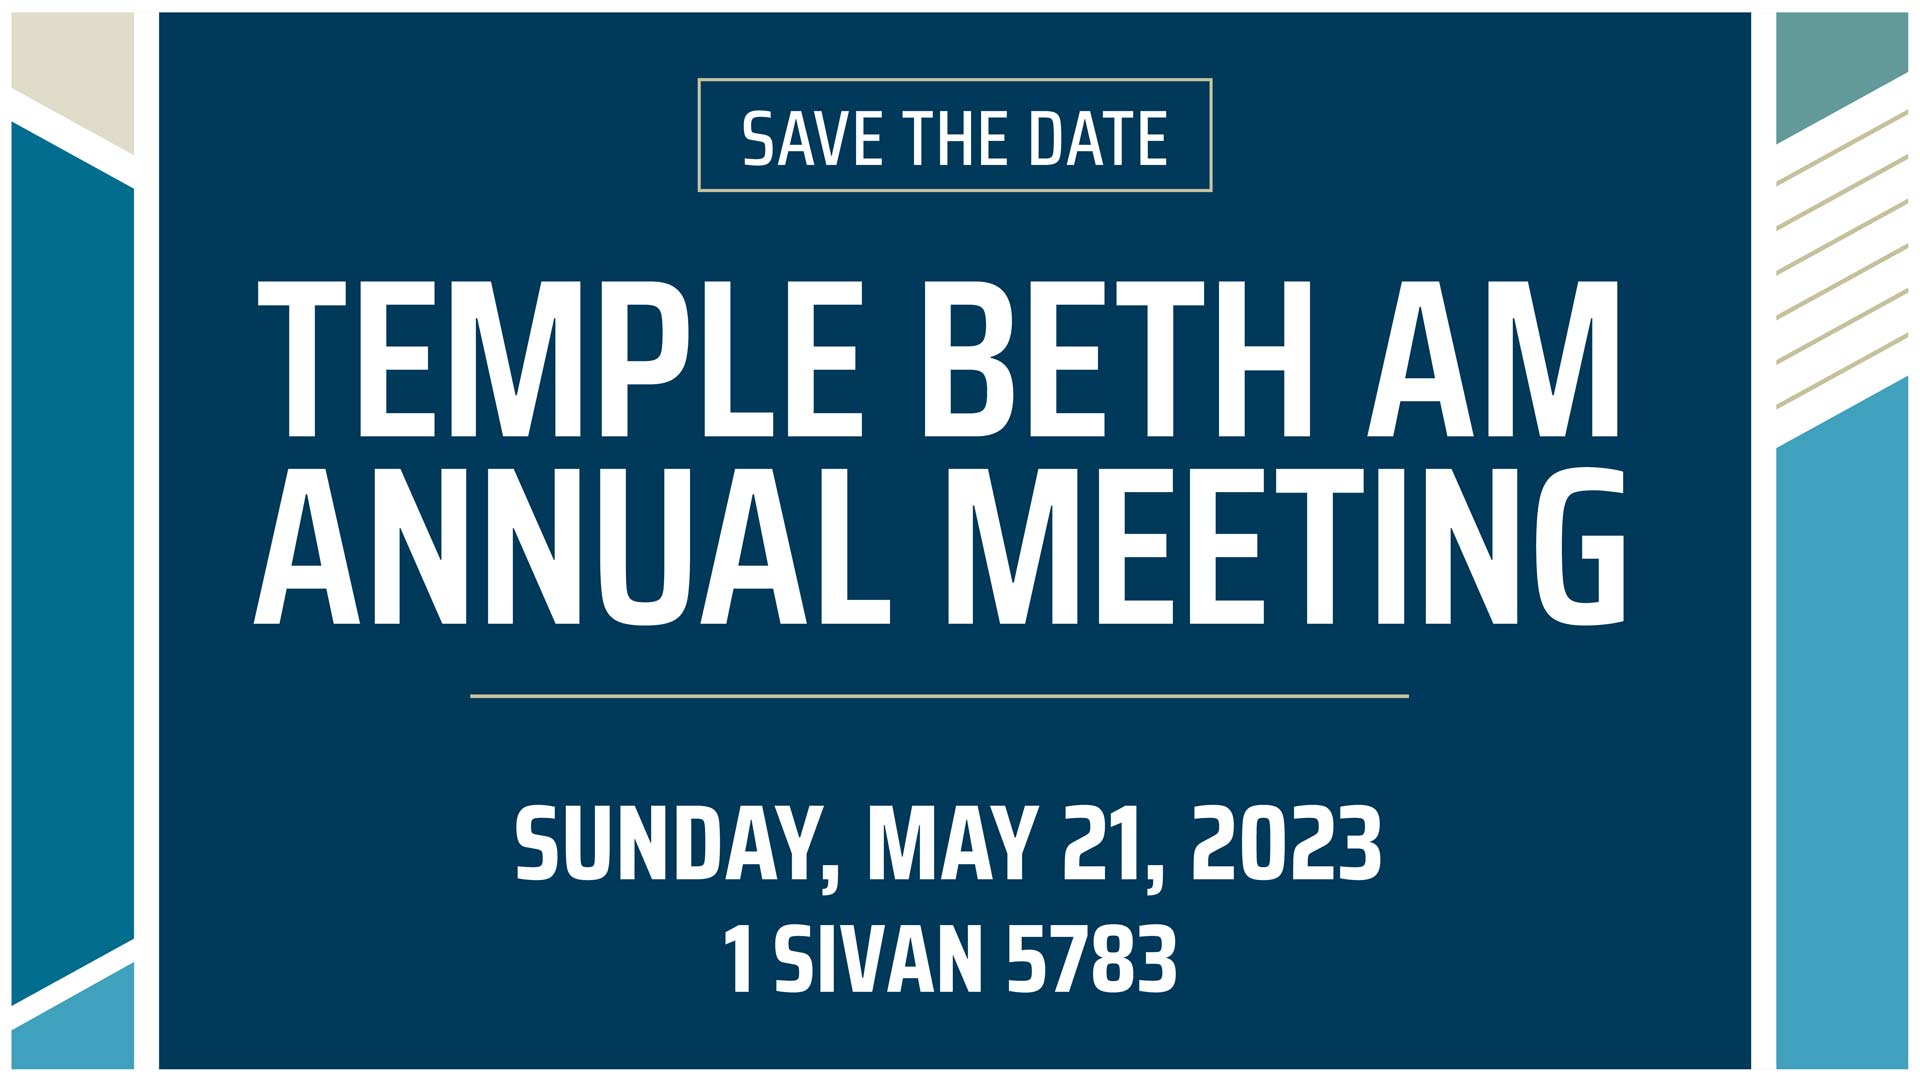 Save the date- Temple Beth Am Annual Meeting. Sunday, May 21, 2023. 1 Sivan 5783